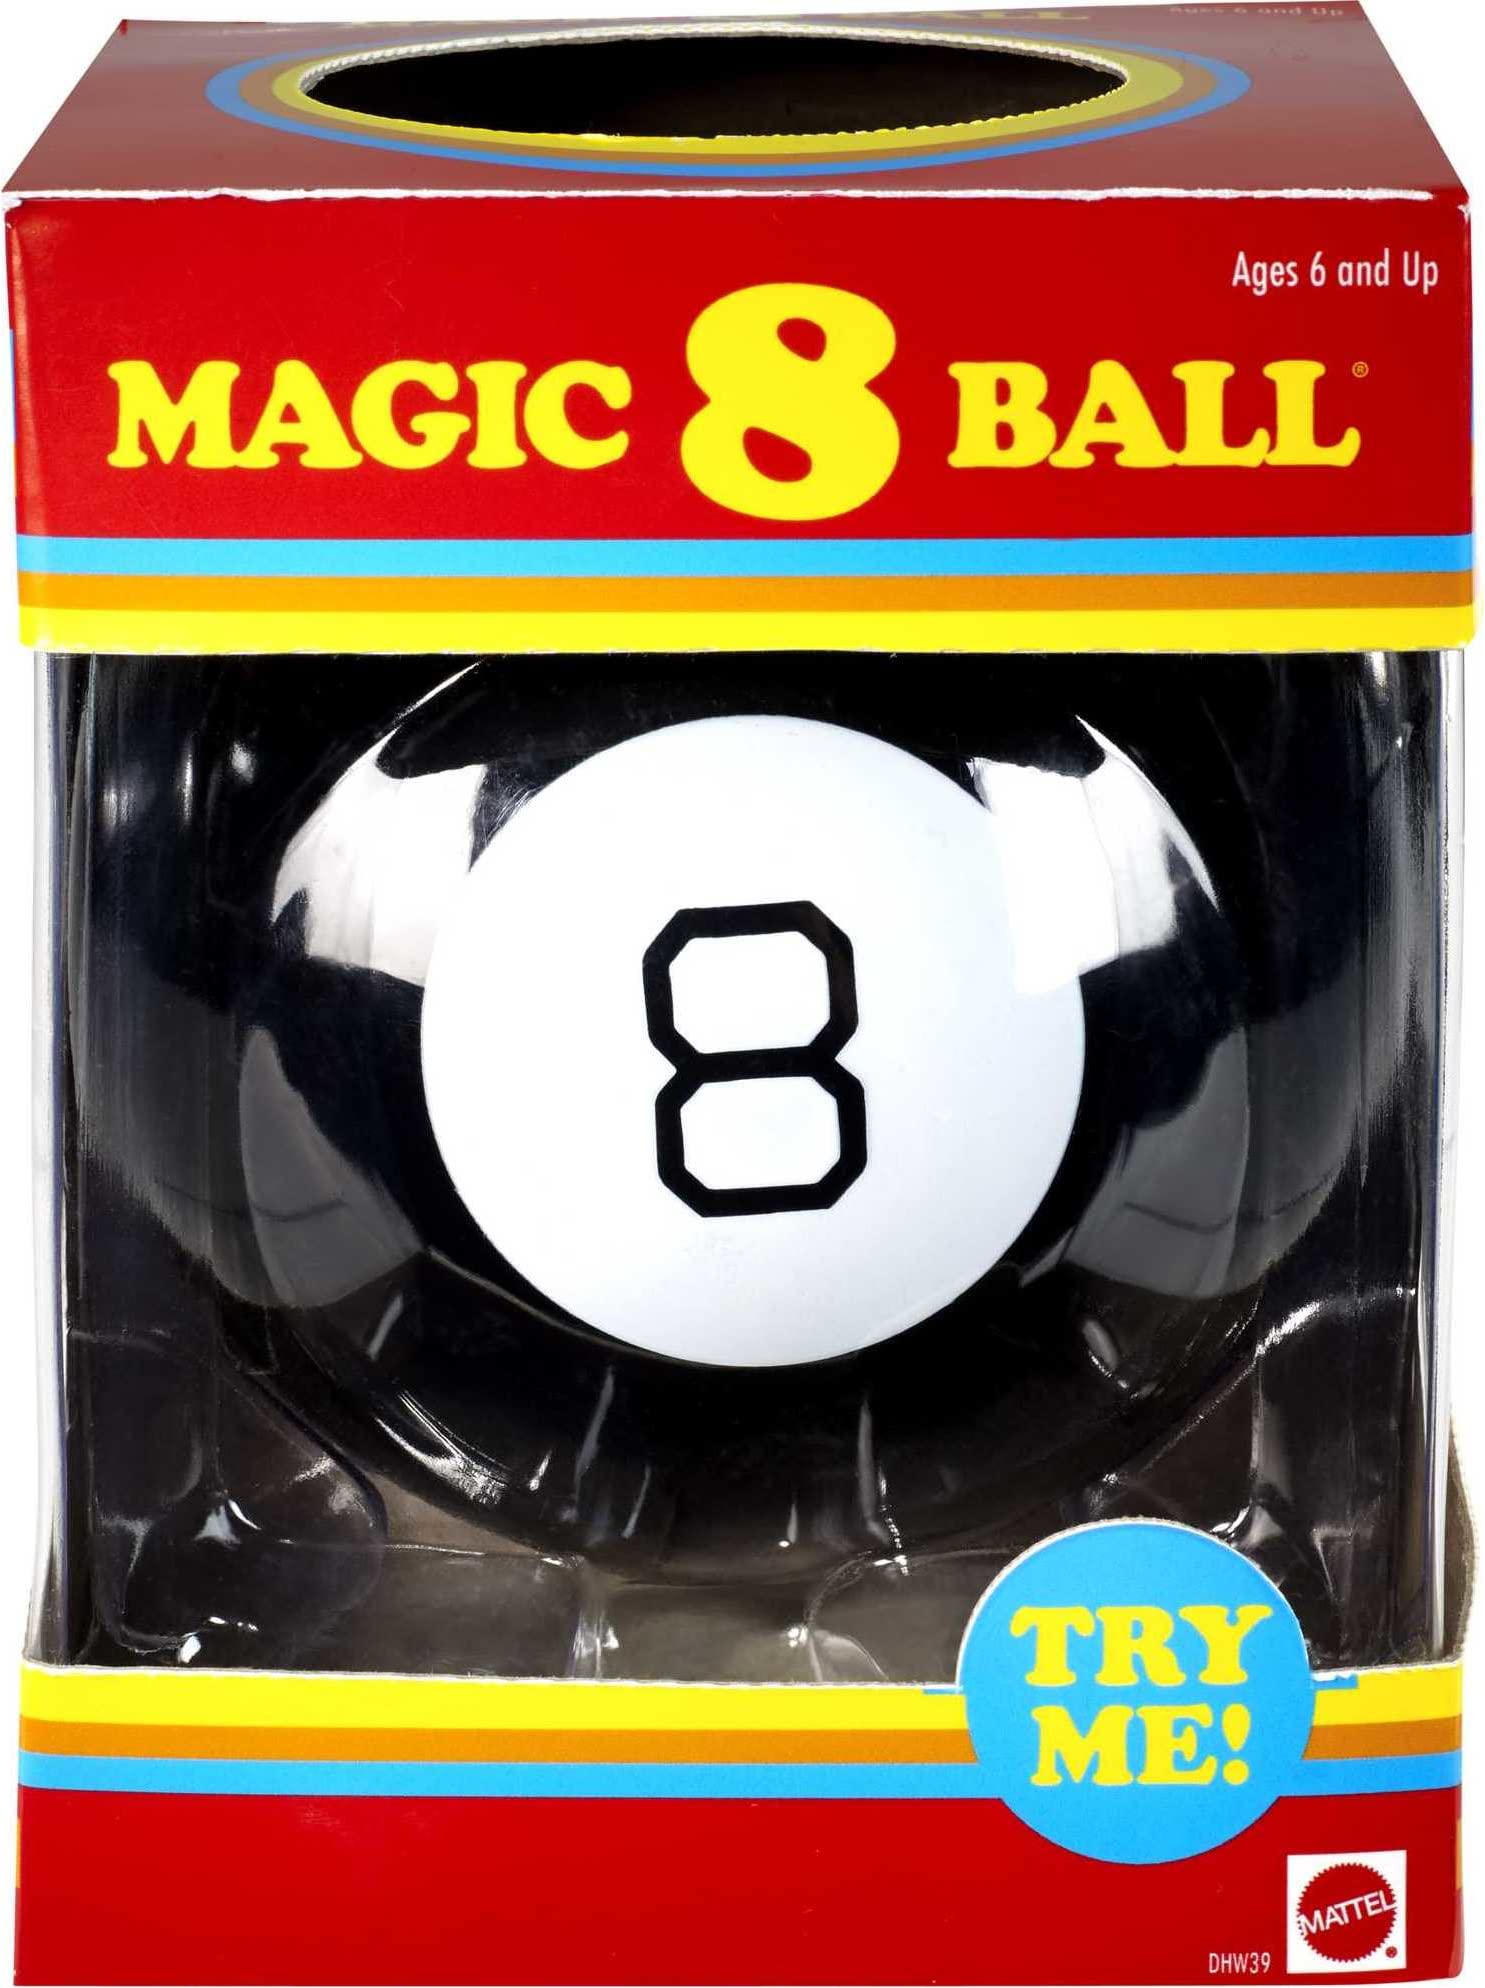 Magic 8 Ball Kids Toy, Retro Themed Novelty Fortune Teller, Ask a Question and Turn Over for Answer [Amazon Exclusive] & Winning Moves Games Classic Barrel of Monkeys